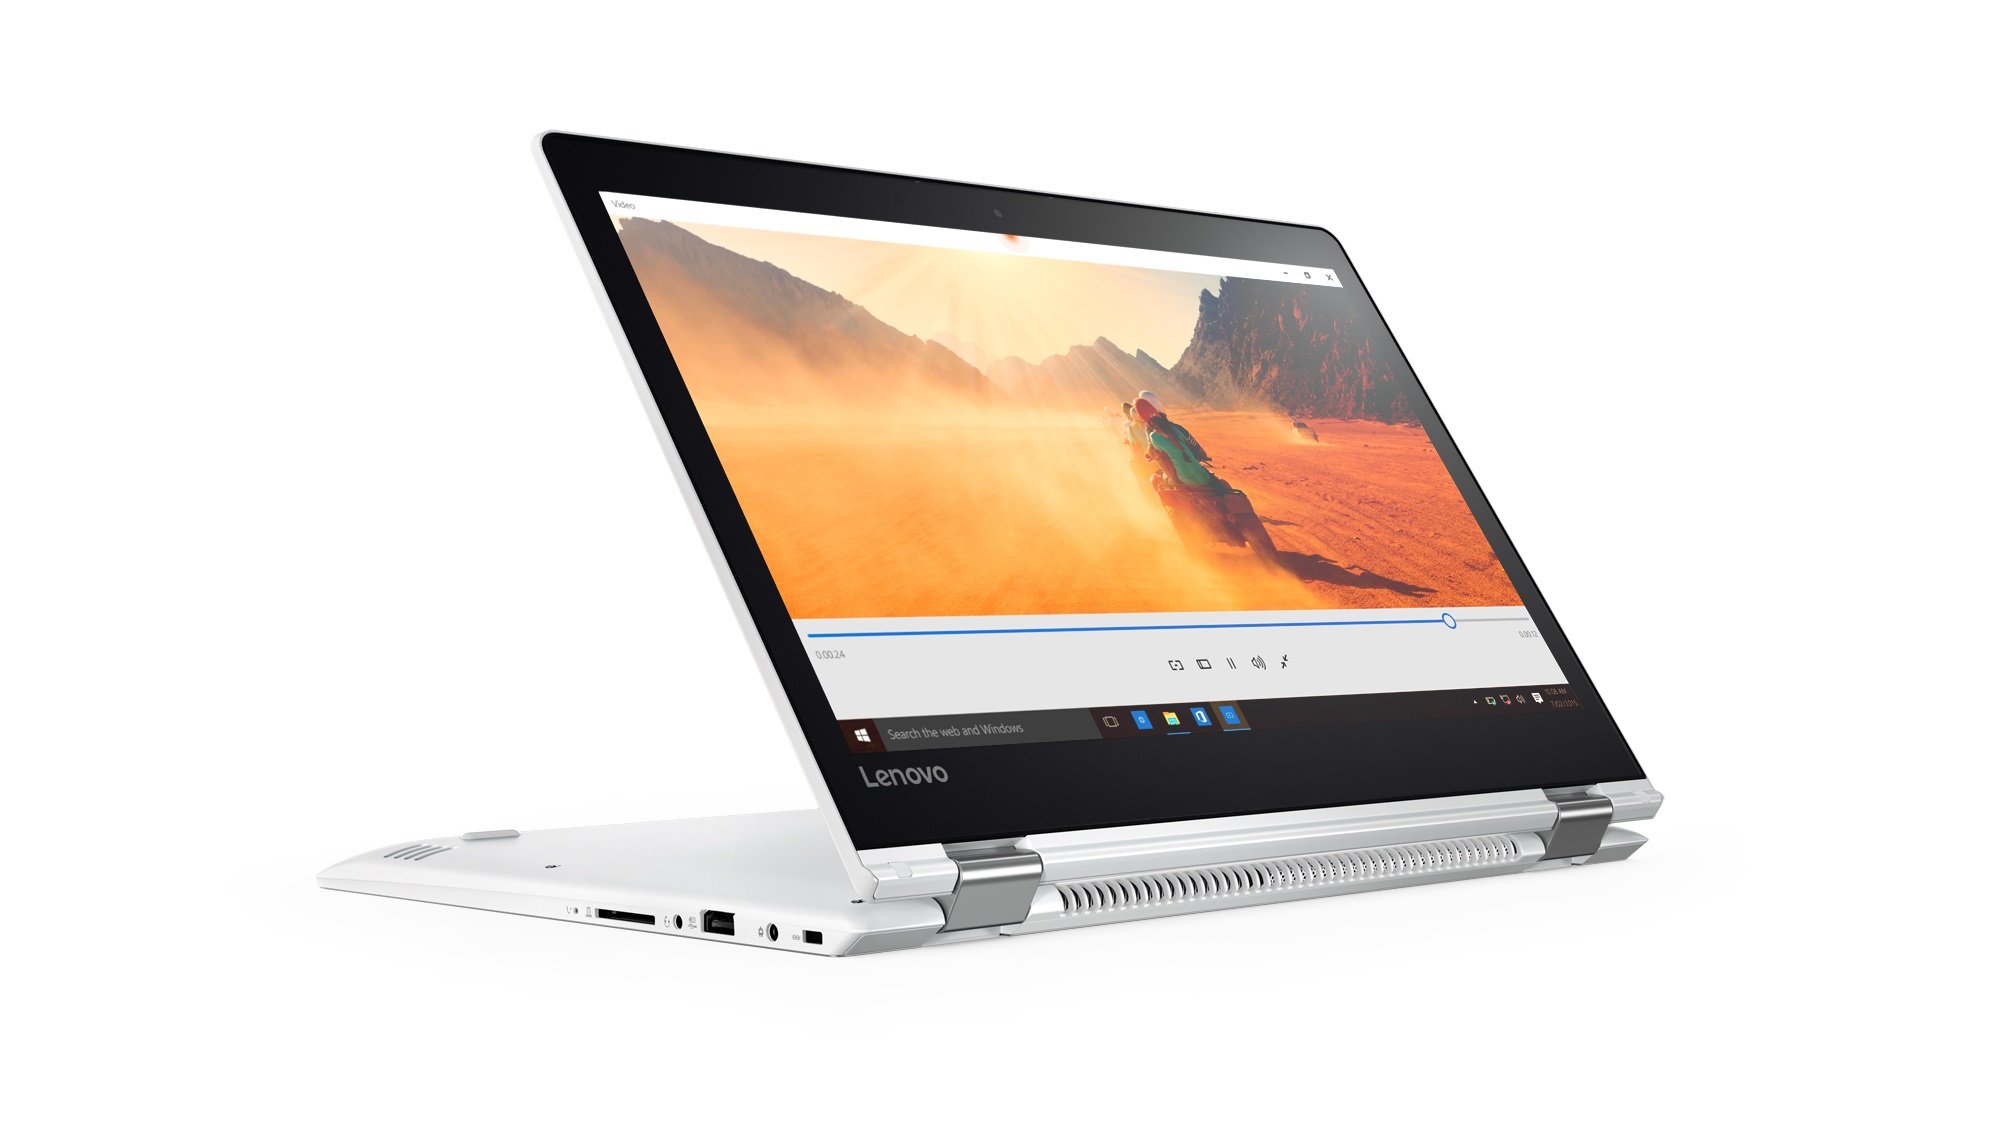 The Lenovo YOGA 510 comes ready-equipped with Windows 10.